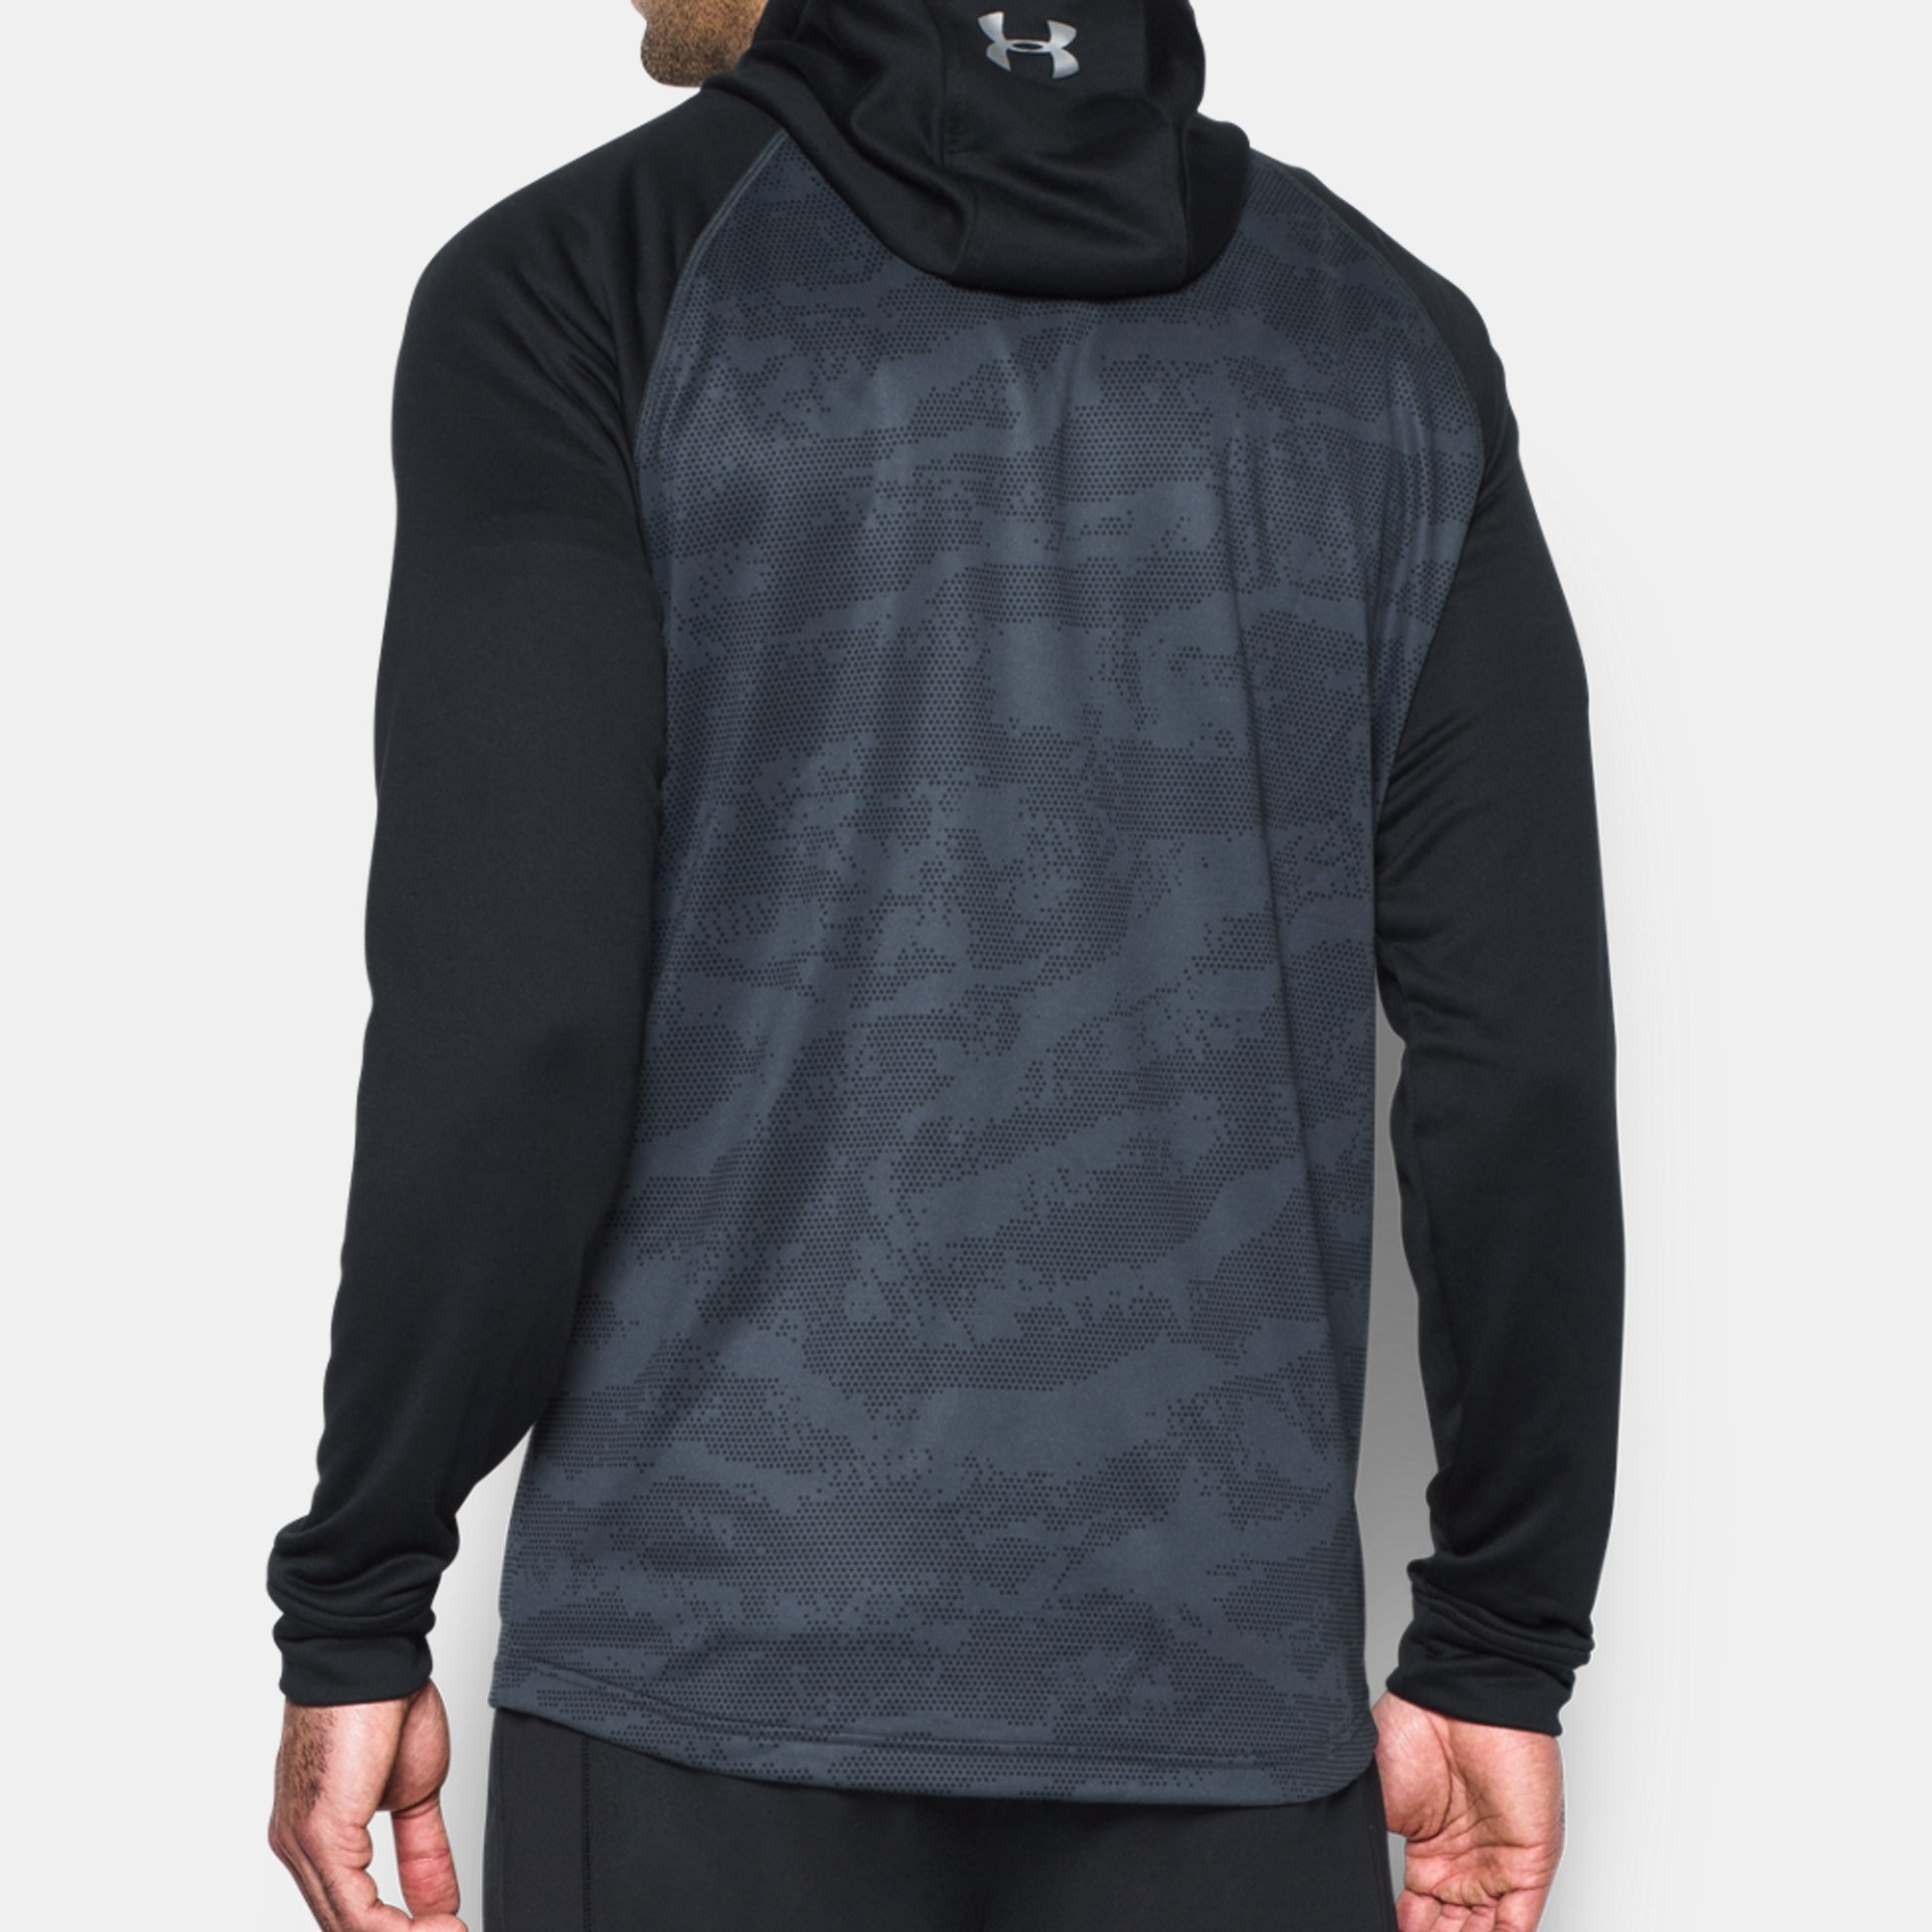 Under Armour Mens Tech Terry Fish Hook Hoodie